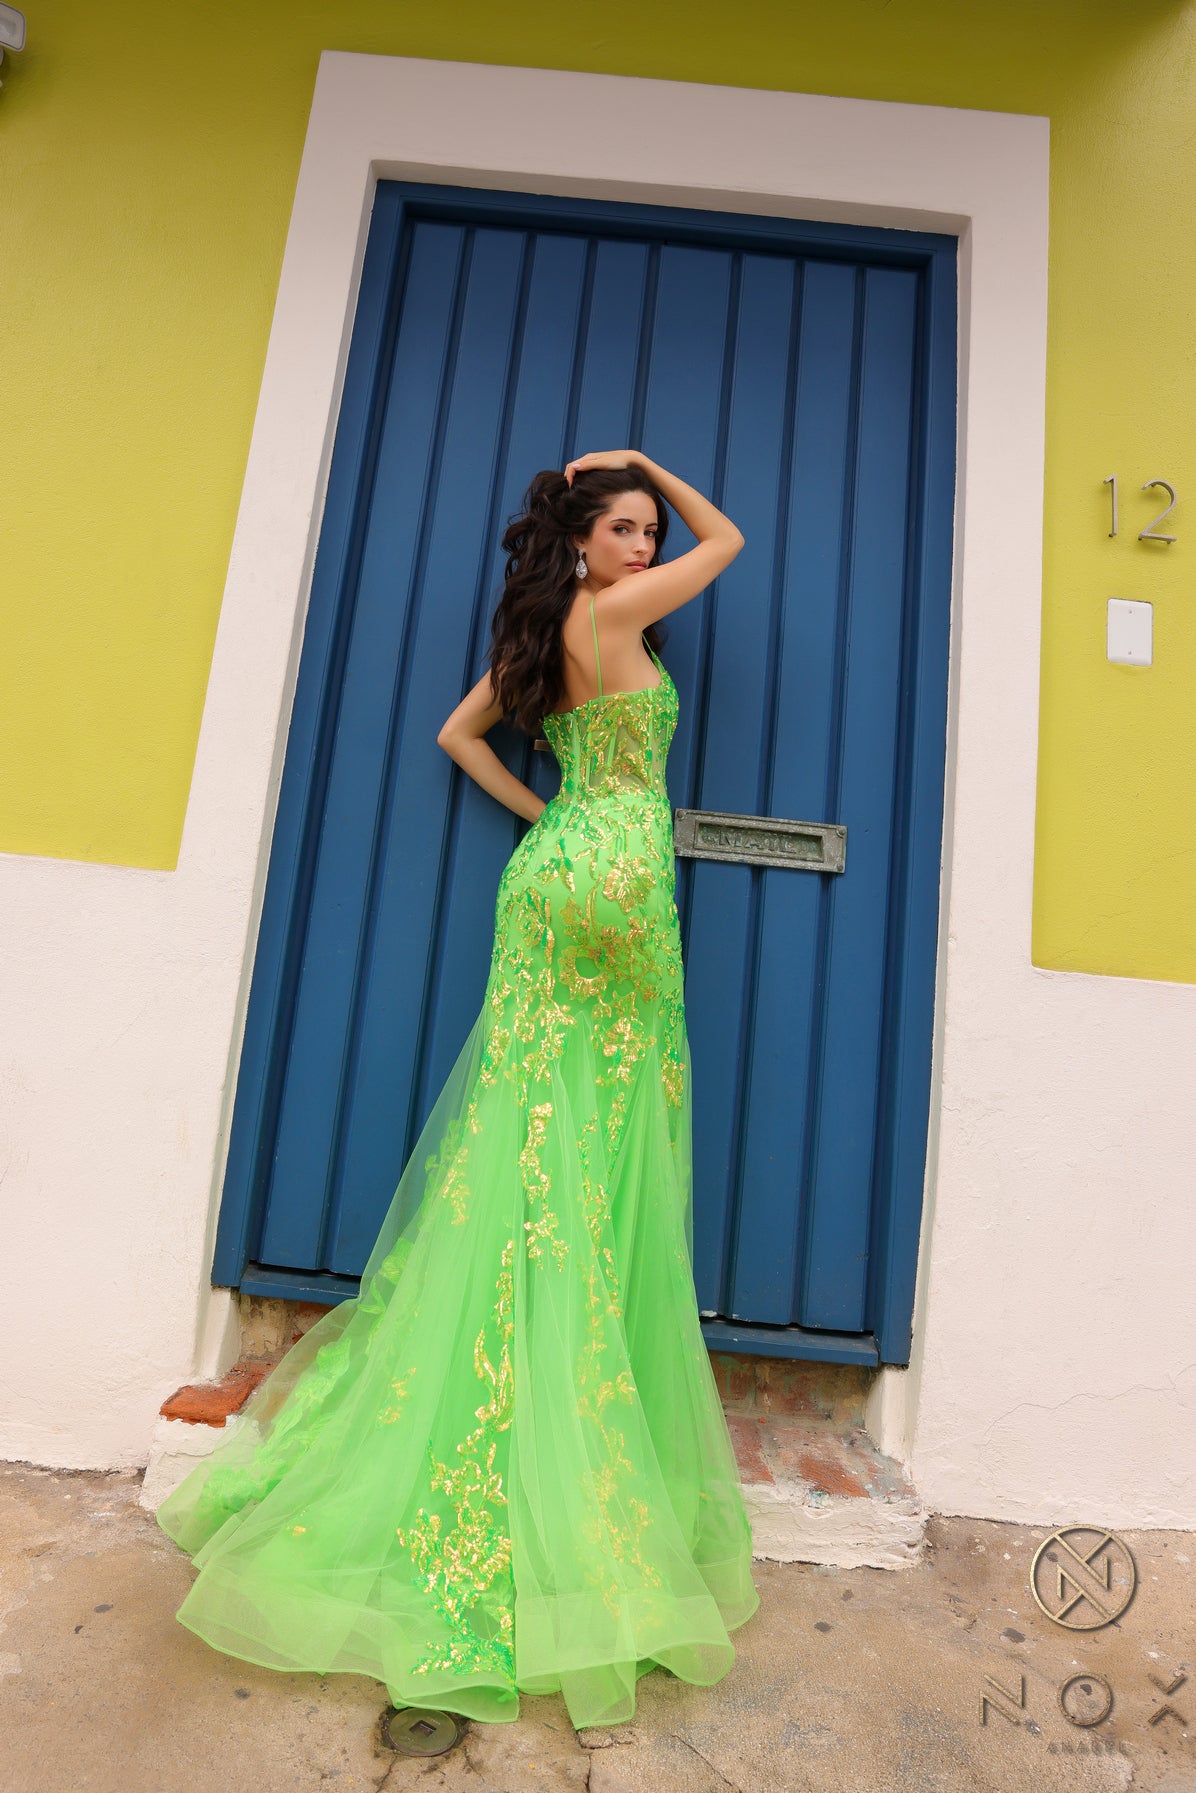 Elevate your prom or pageant look with the Nox Anabel Q1390 Prom Dress. Featuring a long sequin body with a sheer corset and mermaid silhouette, this dress will have you shining all night. Stand out in vibrant neon while feeling confident and elegant.  Sizes: 0-16  Colors: Neon Green, Neon Orange, Coral Fuchsia, Ocean Blue